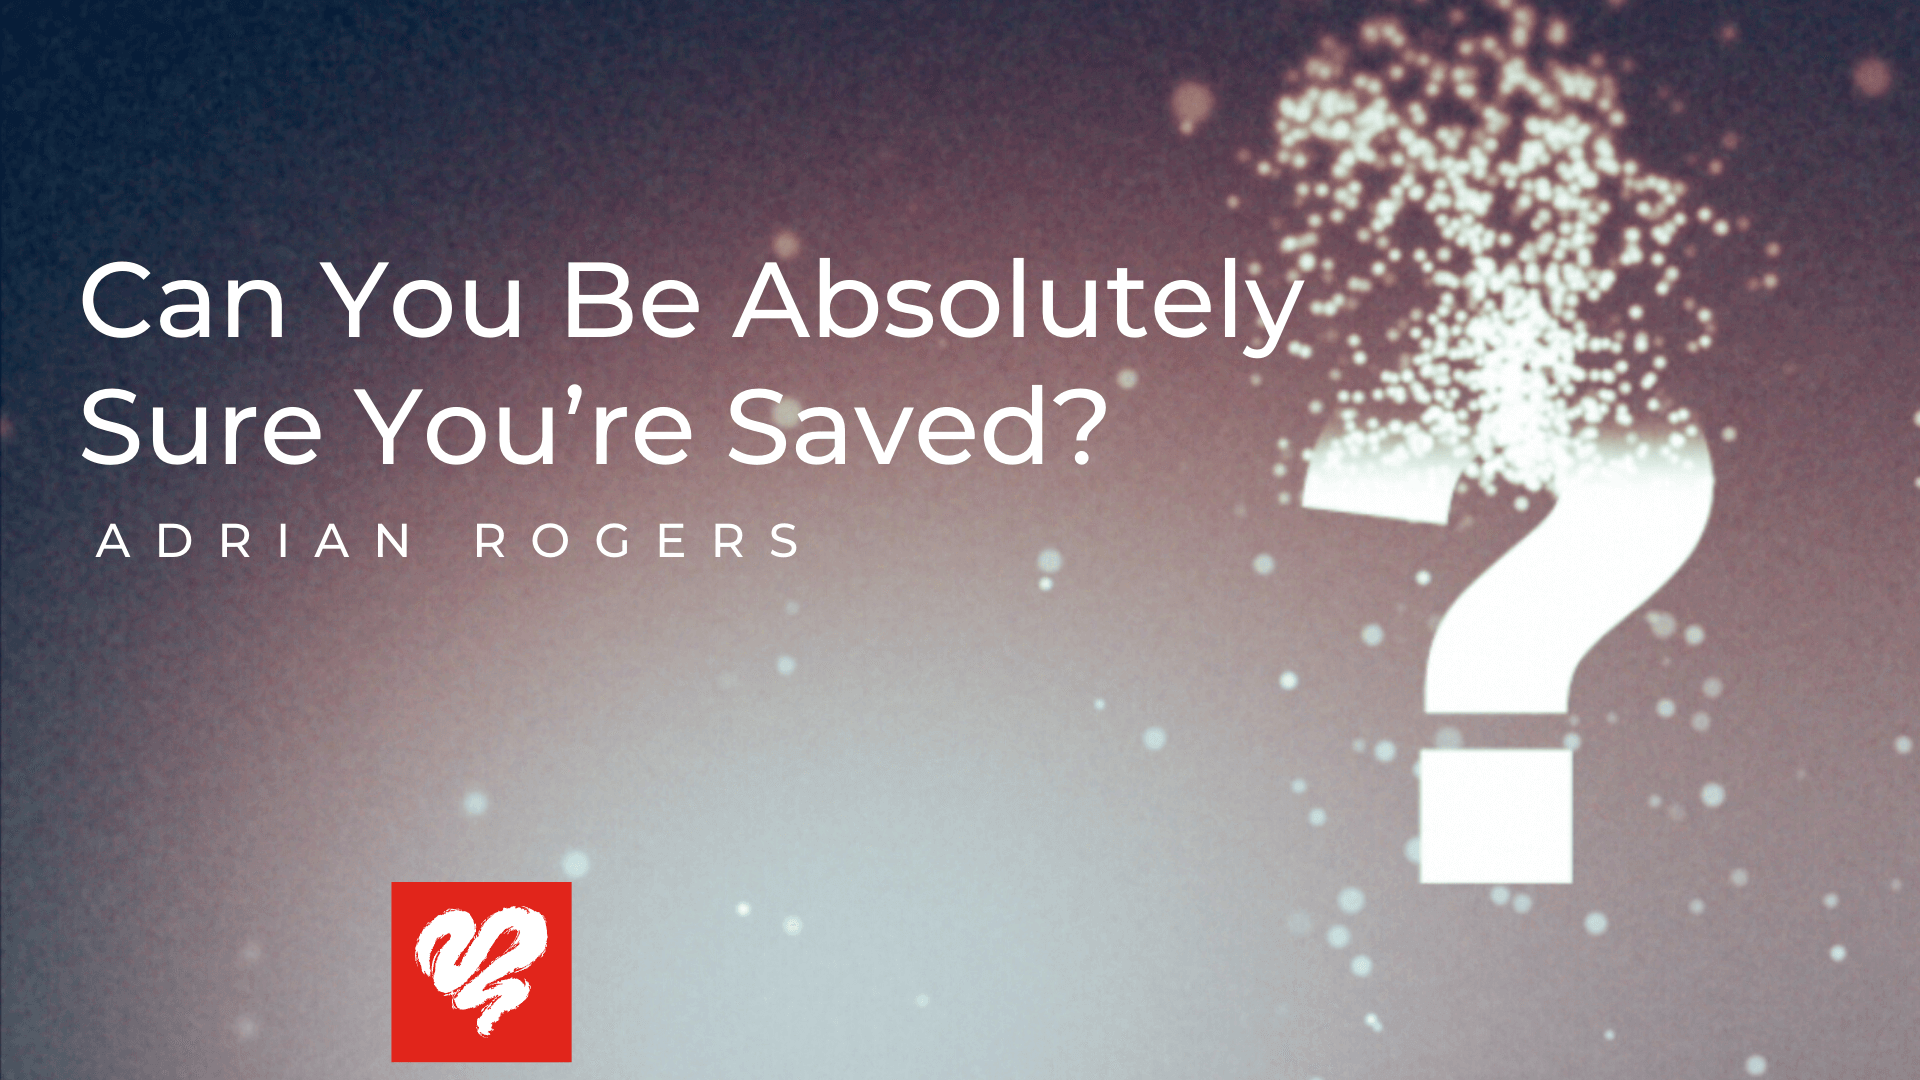 Can you be absolutely sure you're saved?